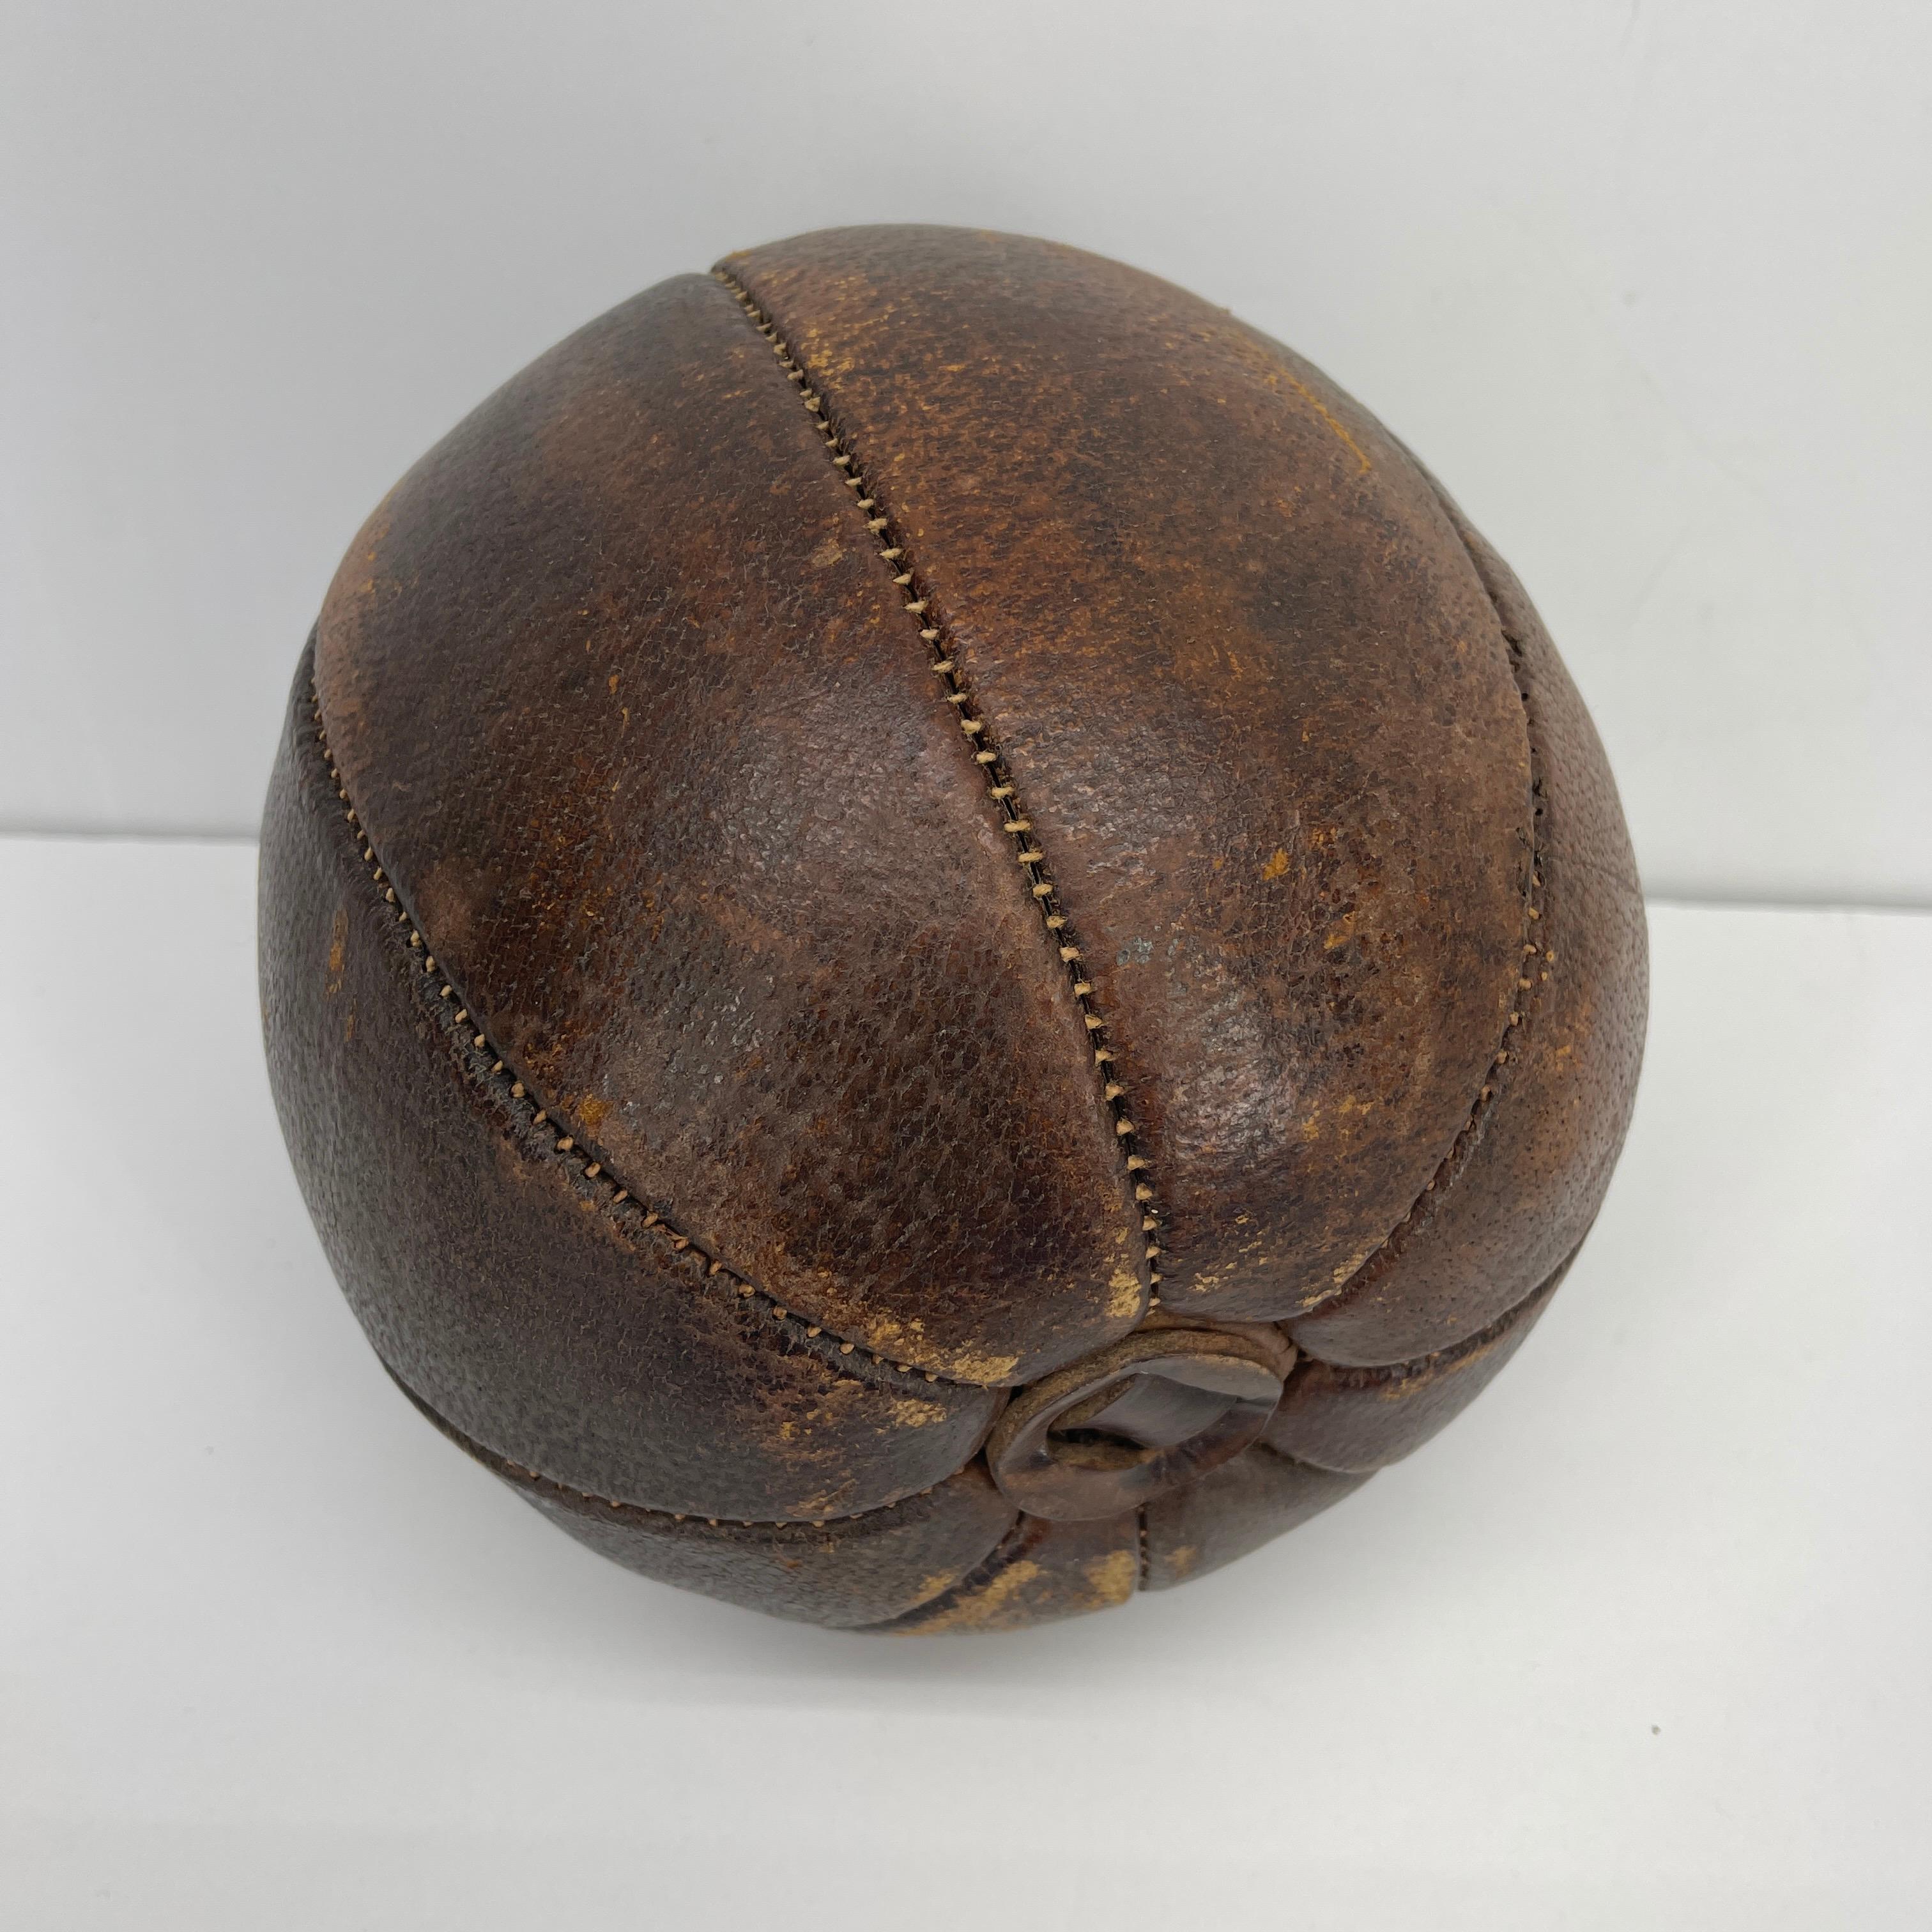 Abercrombie & Fitch Hand-Stitched Leather Pumpkin by Omersa & Company In Good Condition For Sale In Haddonfield, NJ